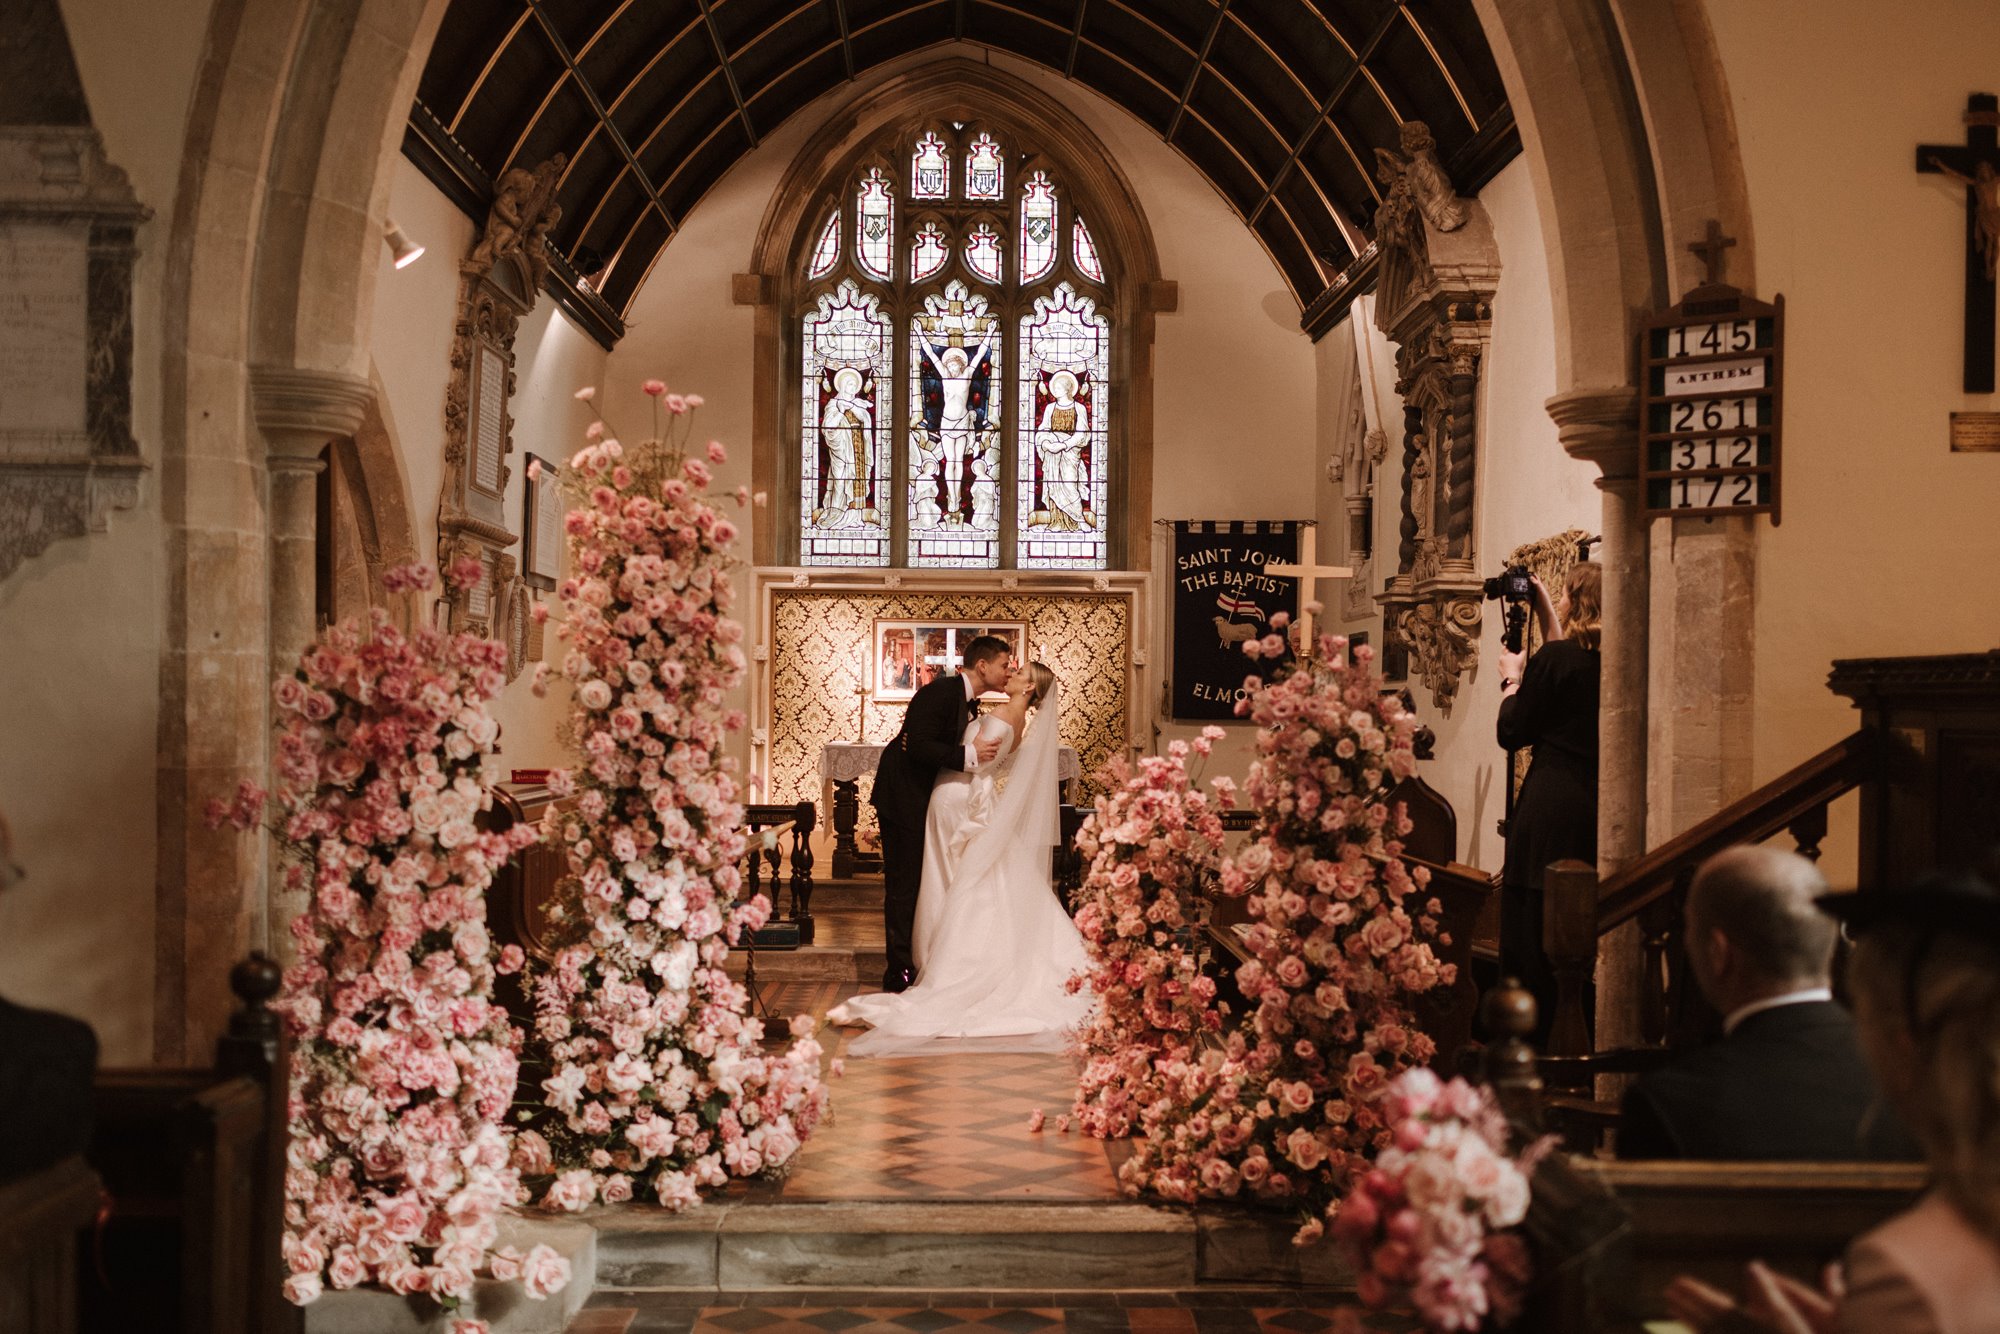 Romantic pink wedding flowers in beautiful towers at a beautiful church wedding in the uk